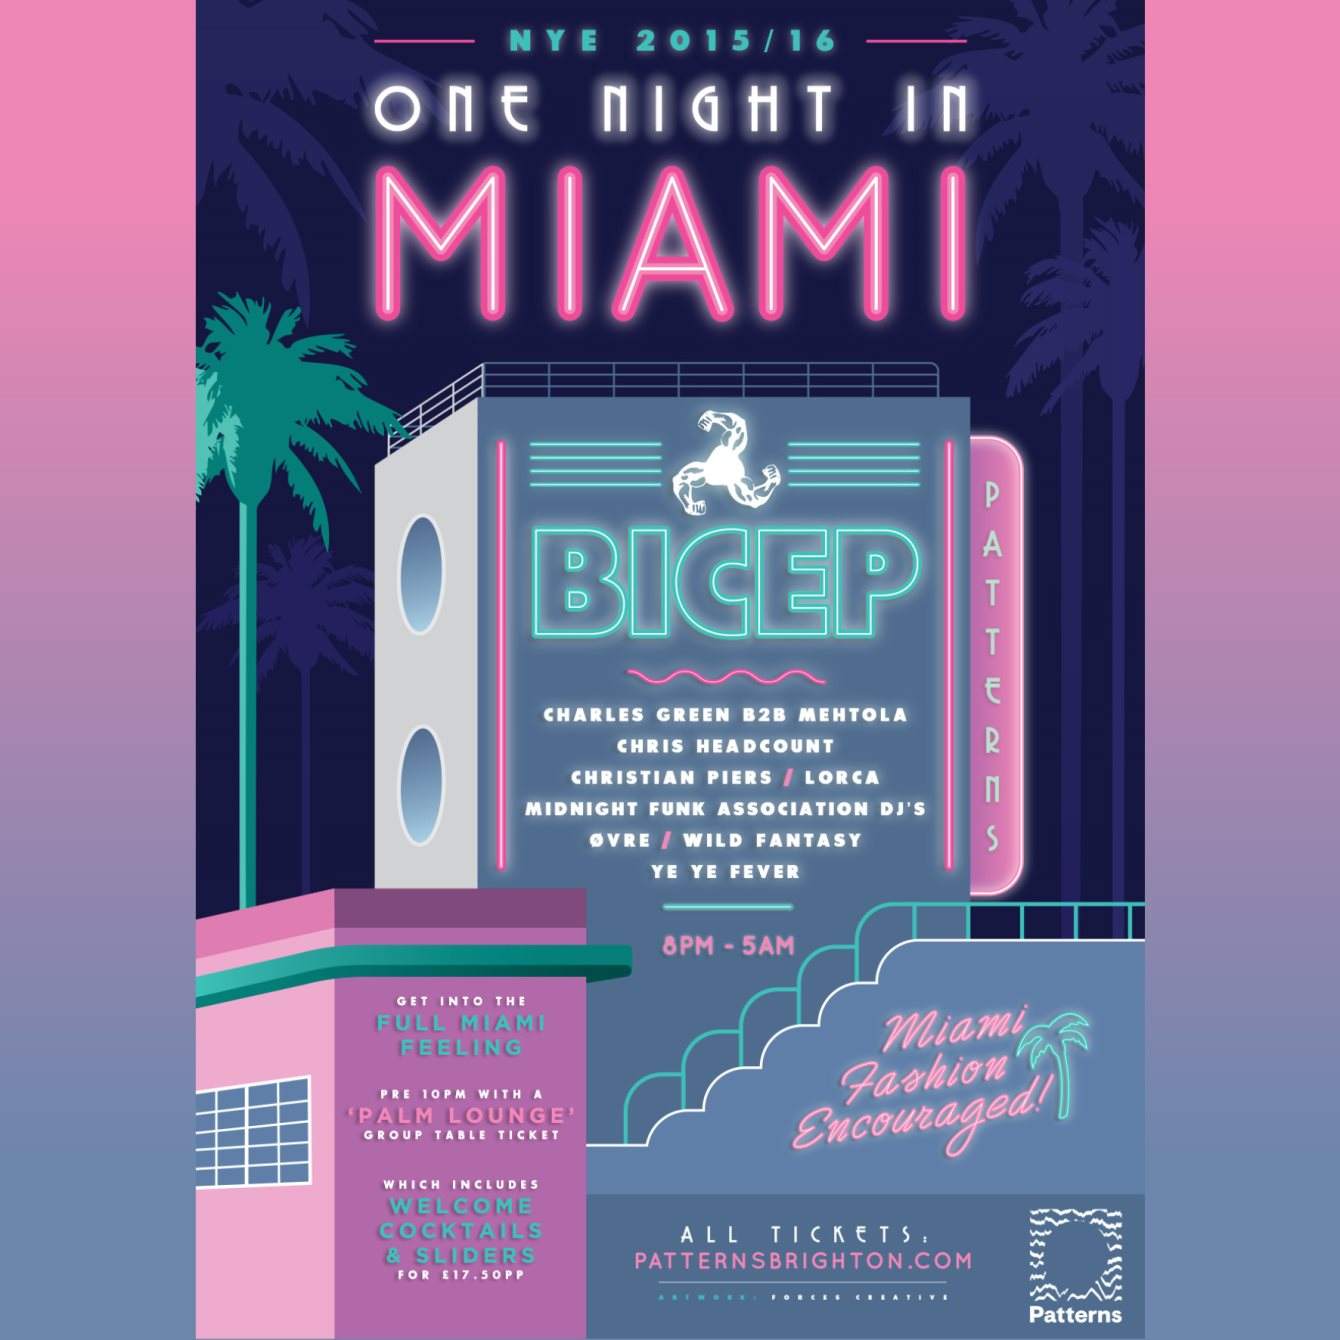 NYE 'One Night in Miami' with Bicep - フライヤー表